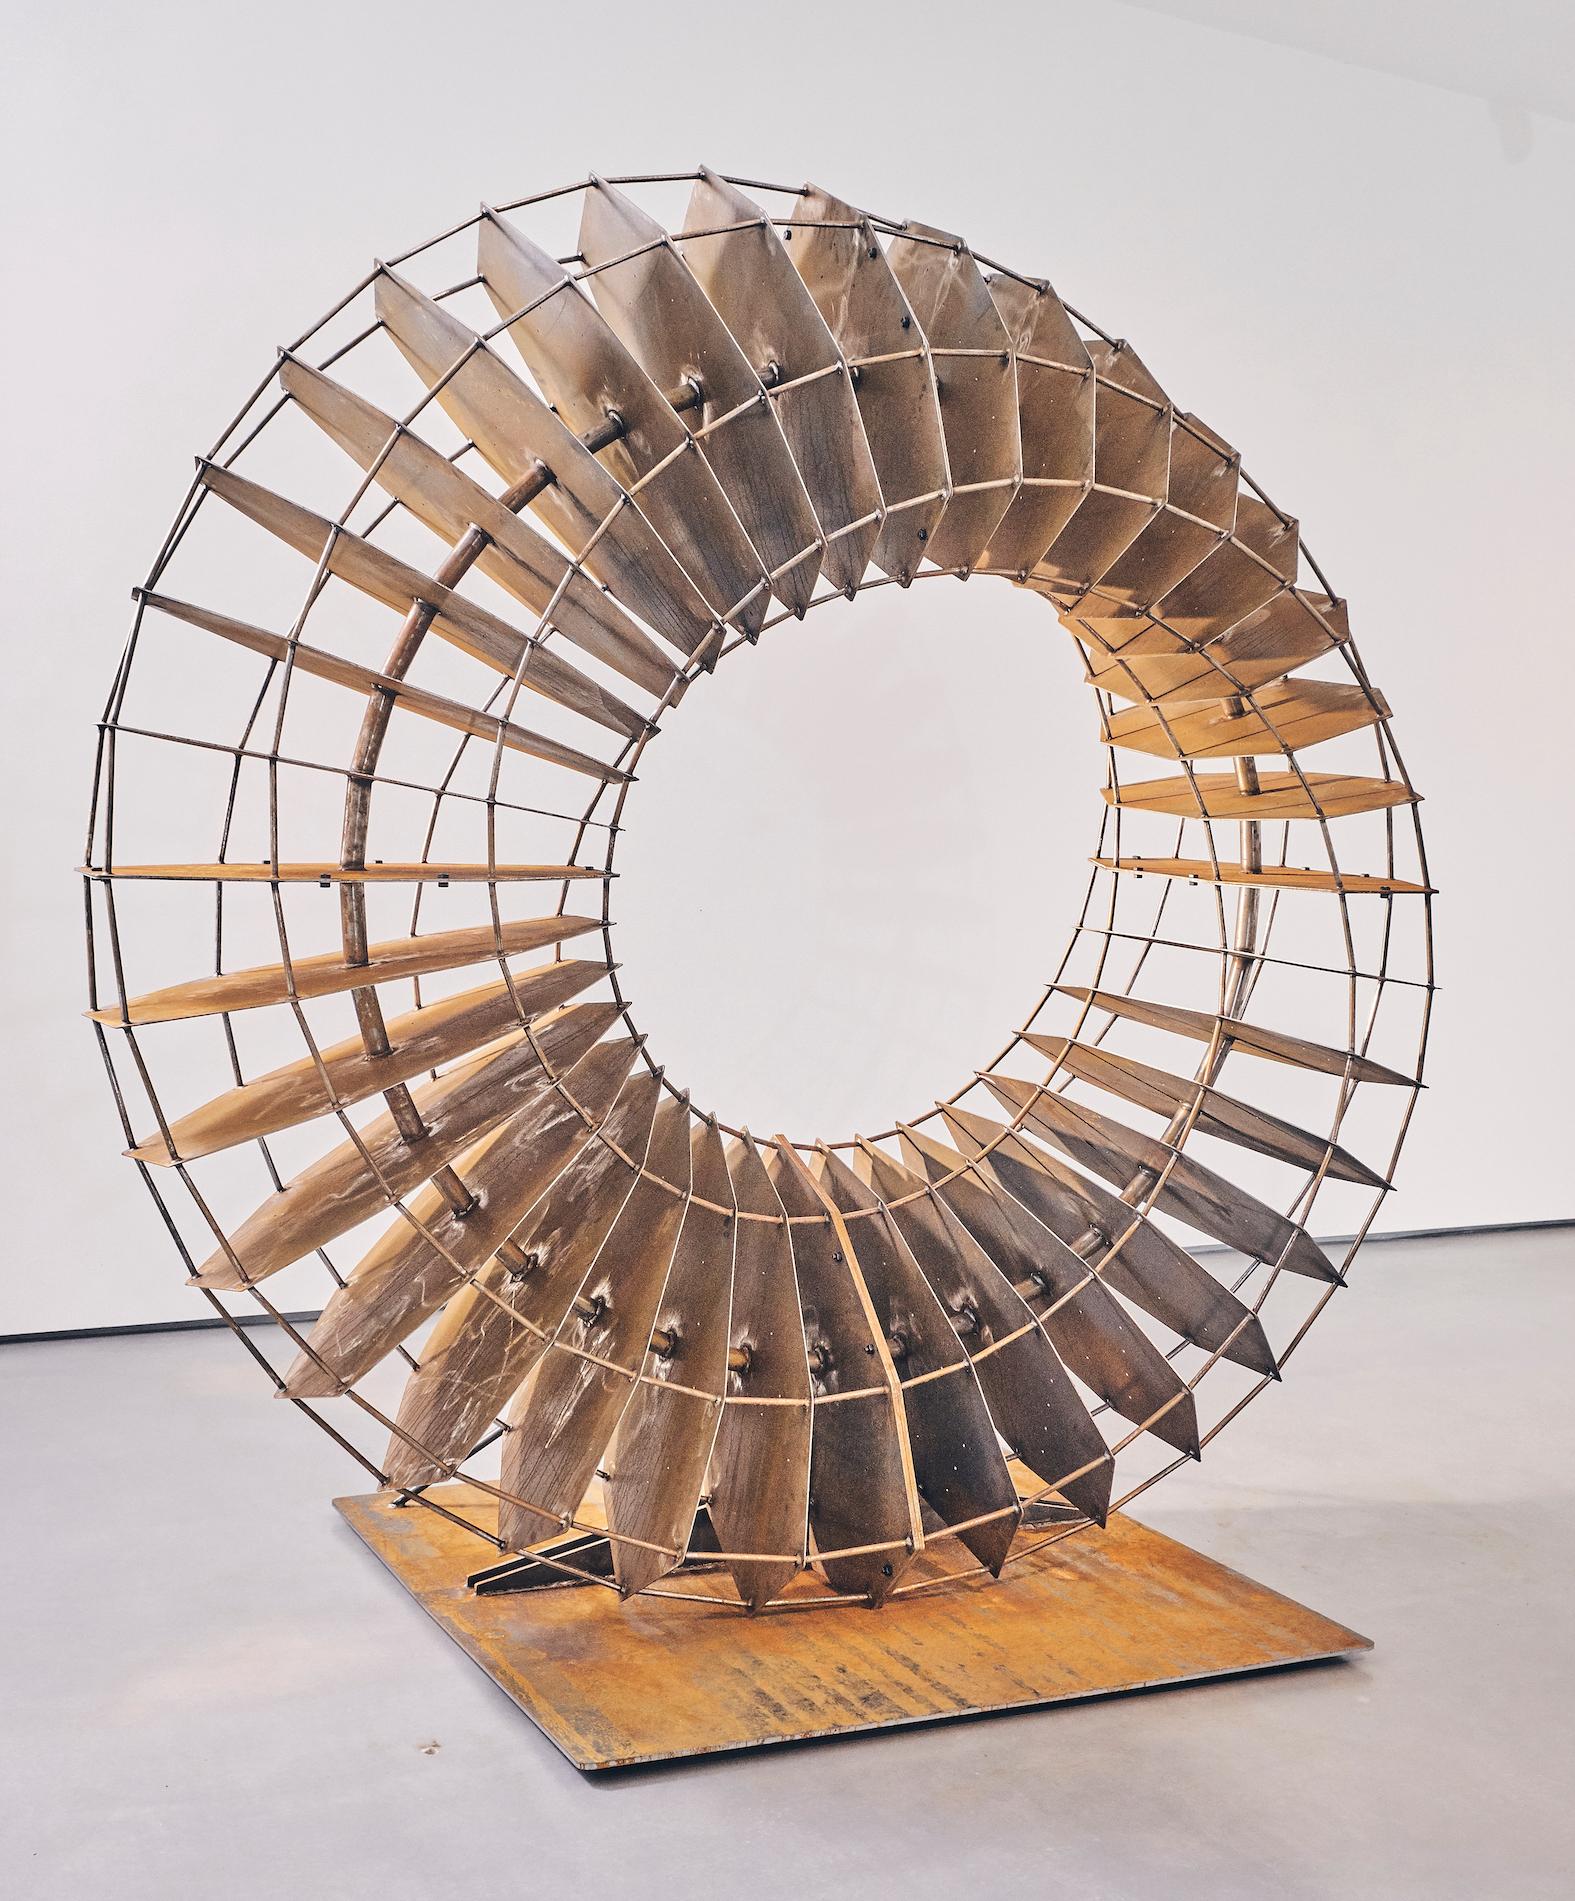 Only Breath is a large, metal sculpture by emerging, British Sculptor Sapien (AKA Steve Anwar). It takes inspiration from a poem of the same name by famous Sufi poet Rumi. The abstract sculpture takes apart the layers of what it means to be a